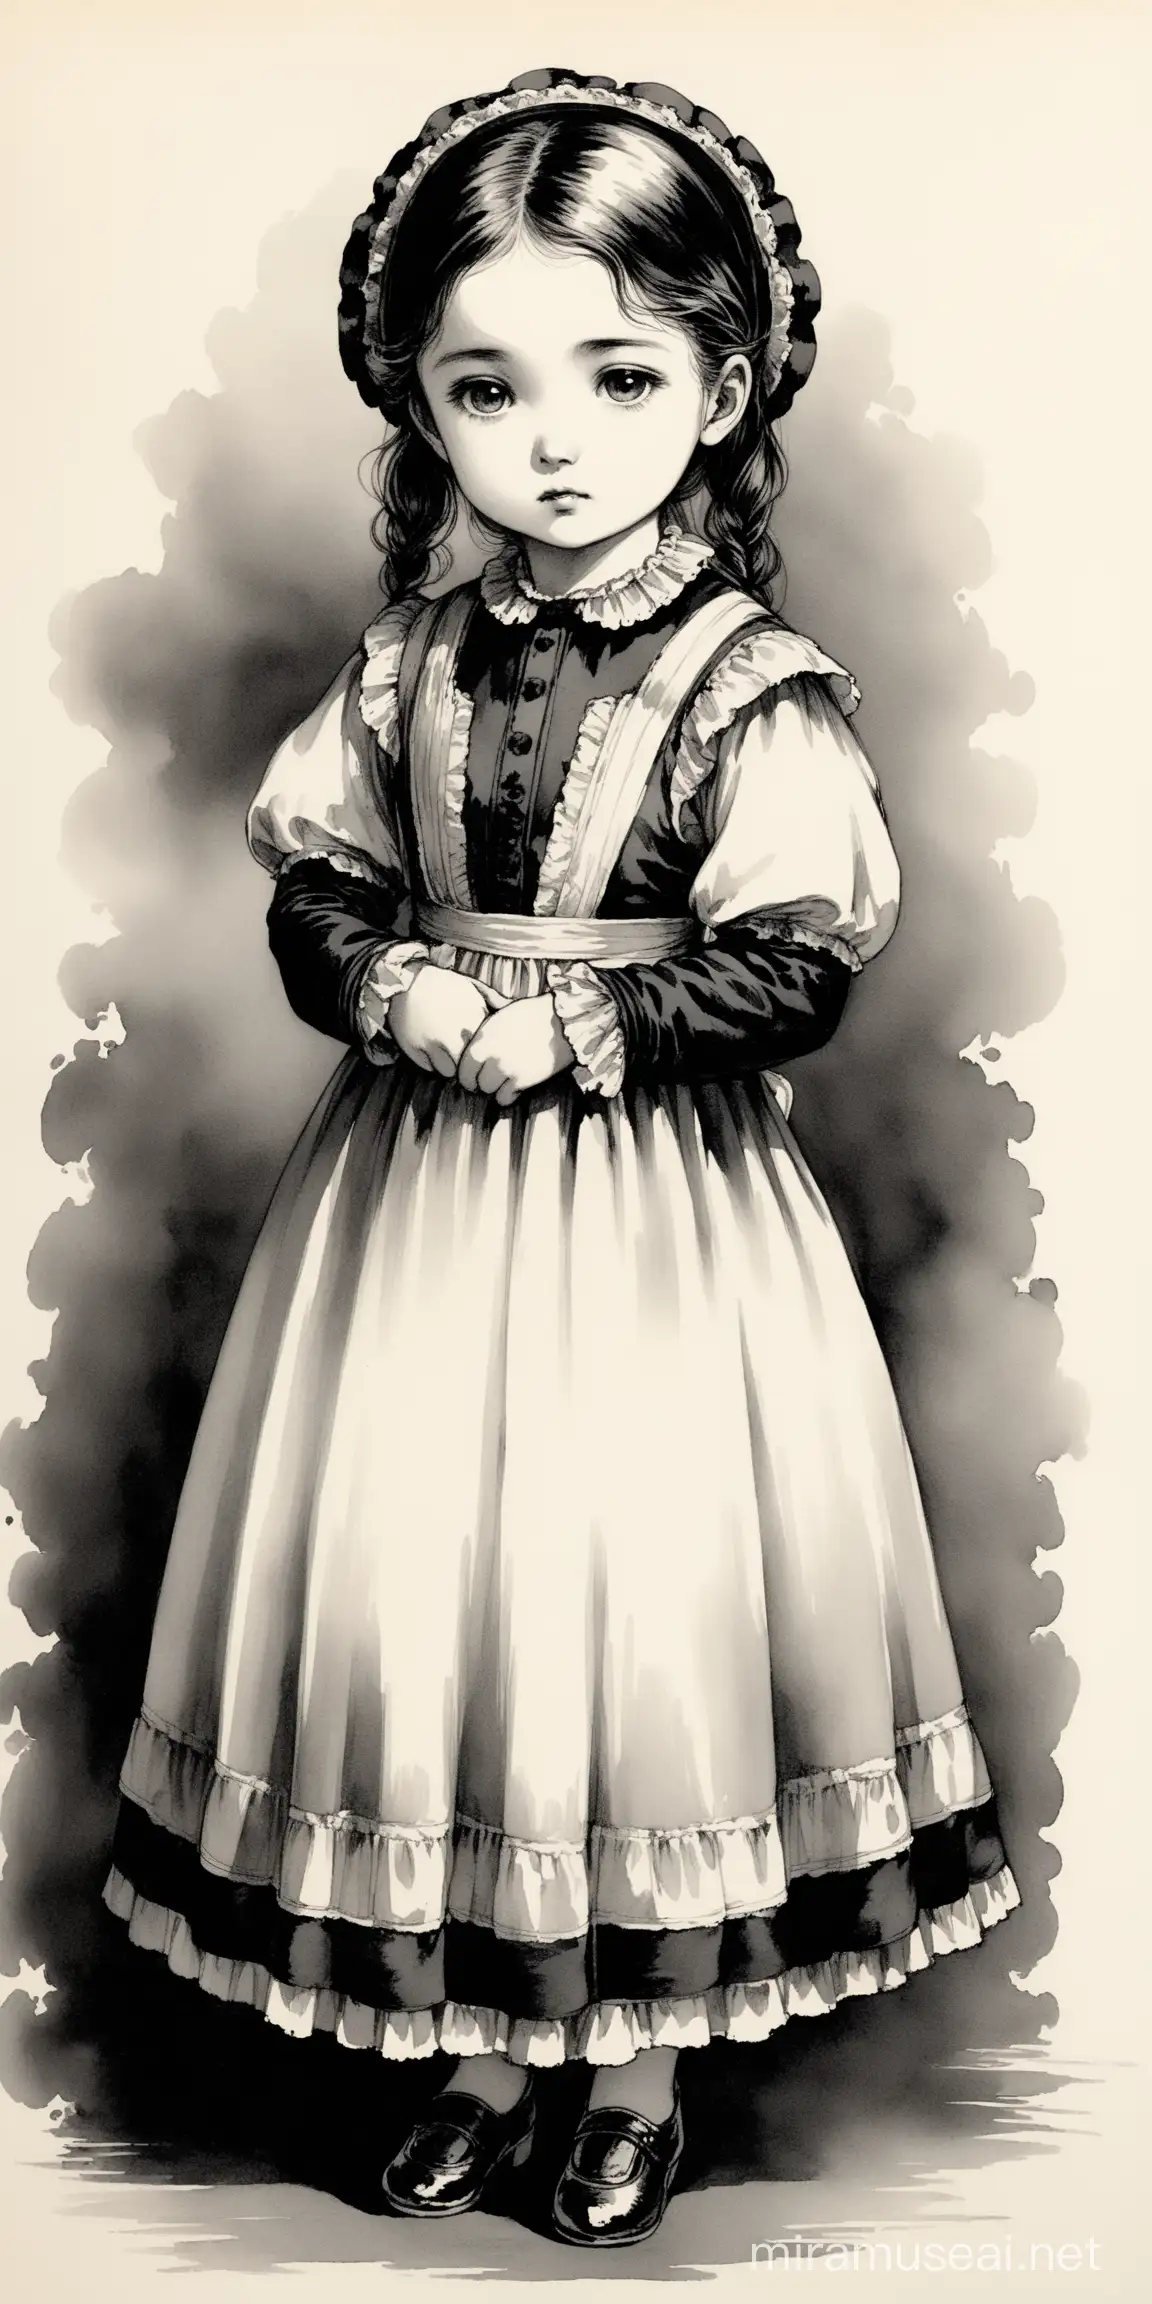 Victorian Era Orphan Girl in Ink Painting Monochrome Portrait